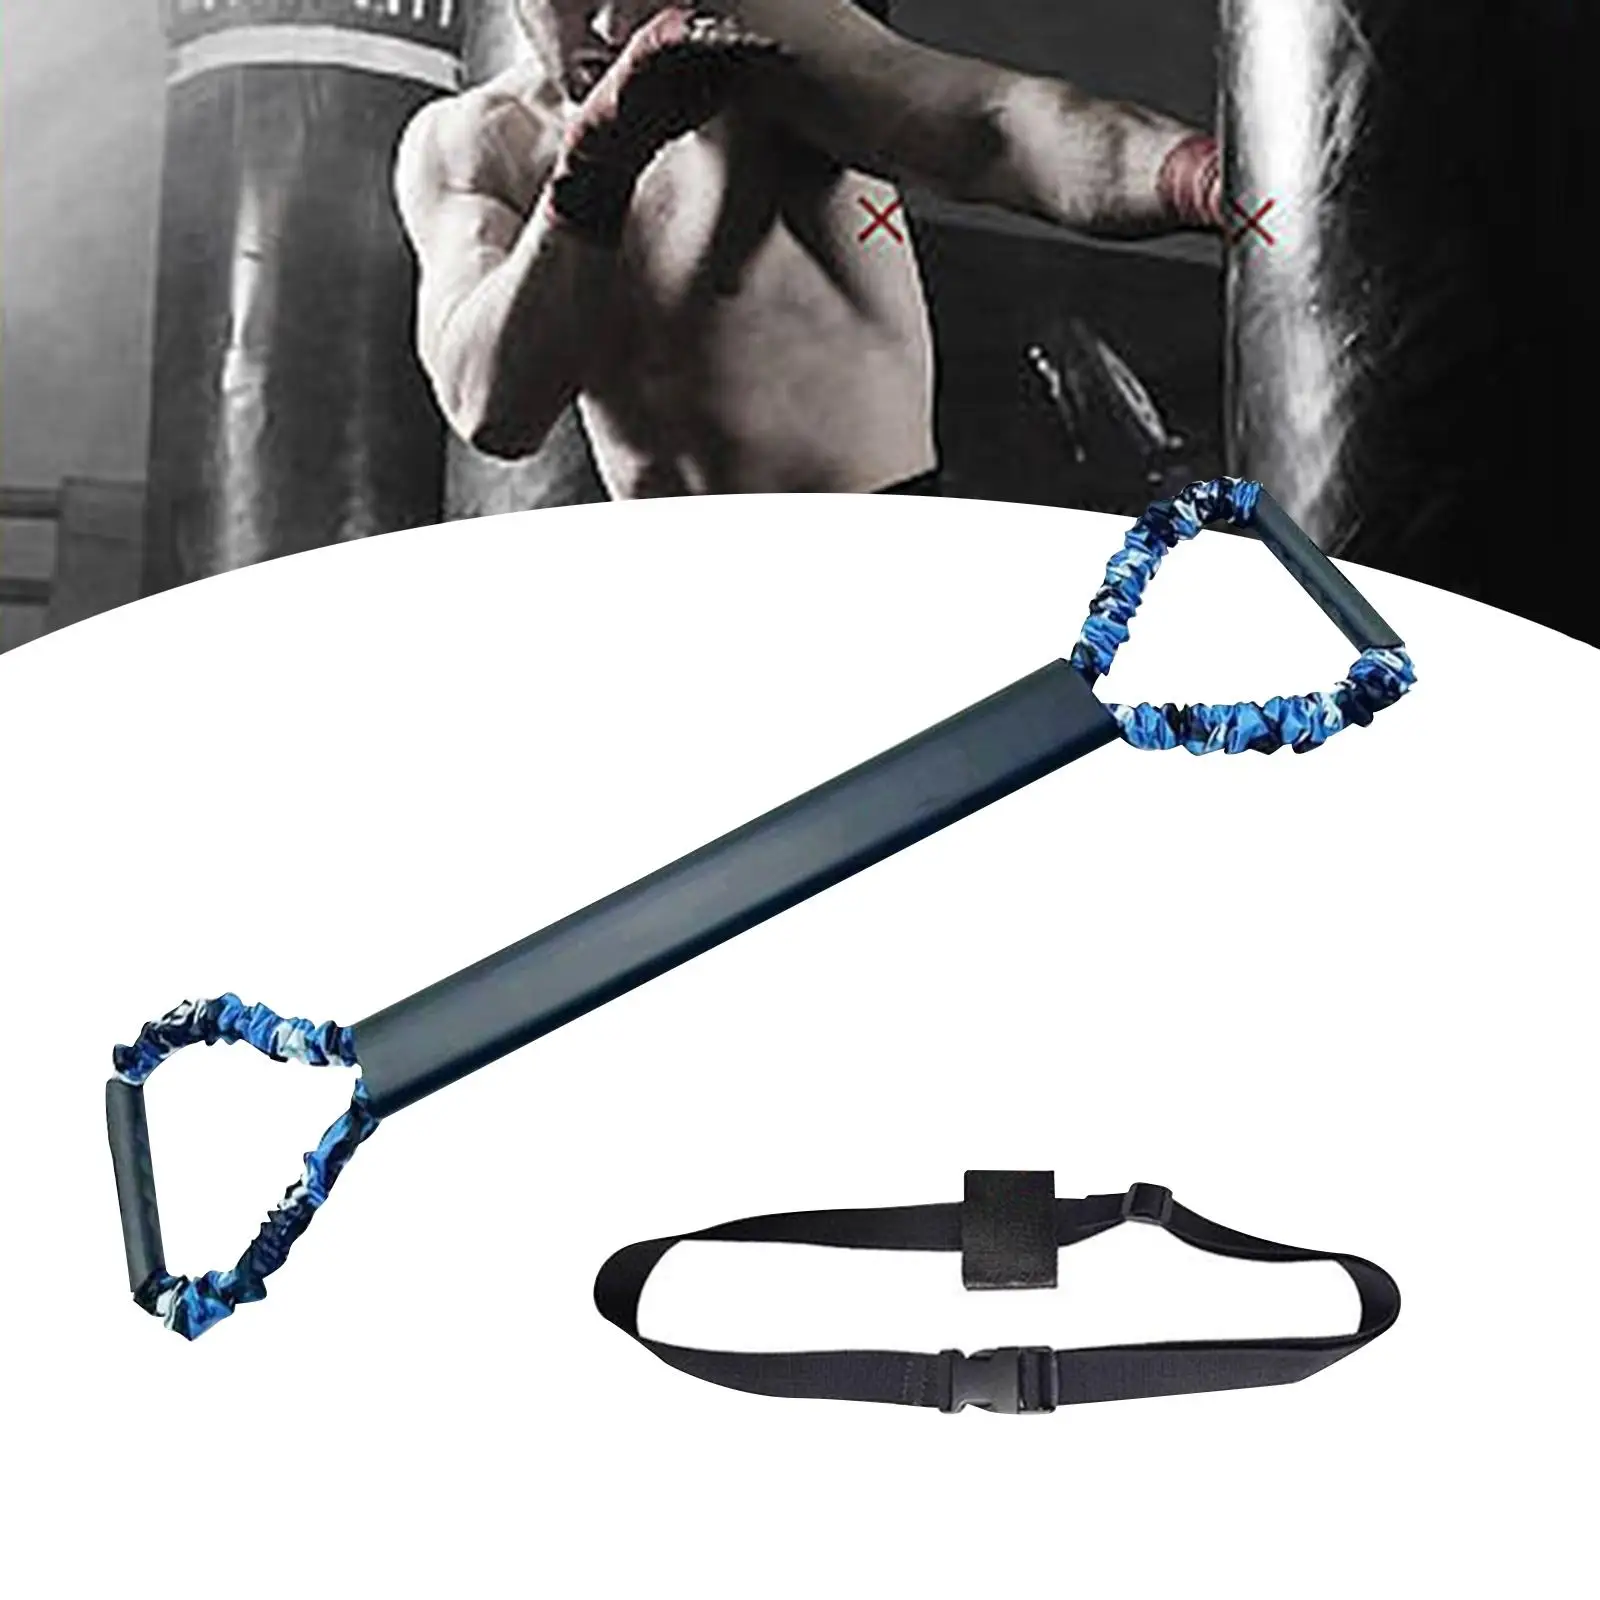 Pulling Rope Fitness Exercise Band Boxing Resistance Band for Legs Arm Pilates Punching Powers Speed Agility Training Basketball